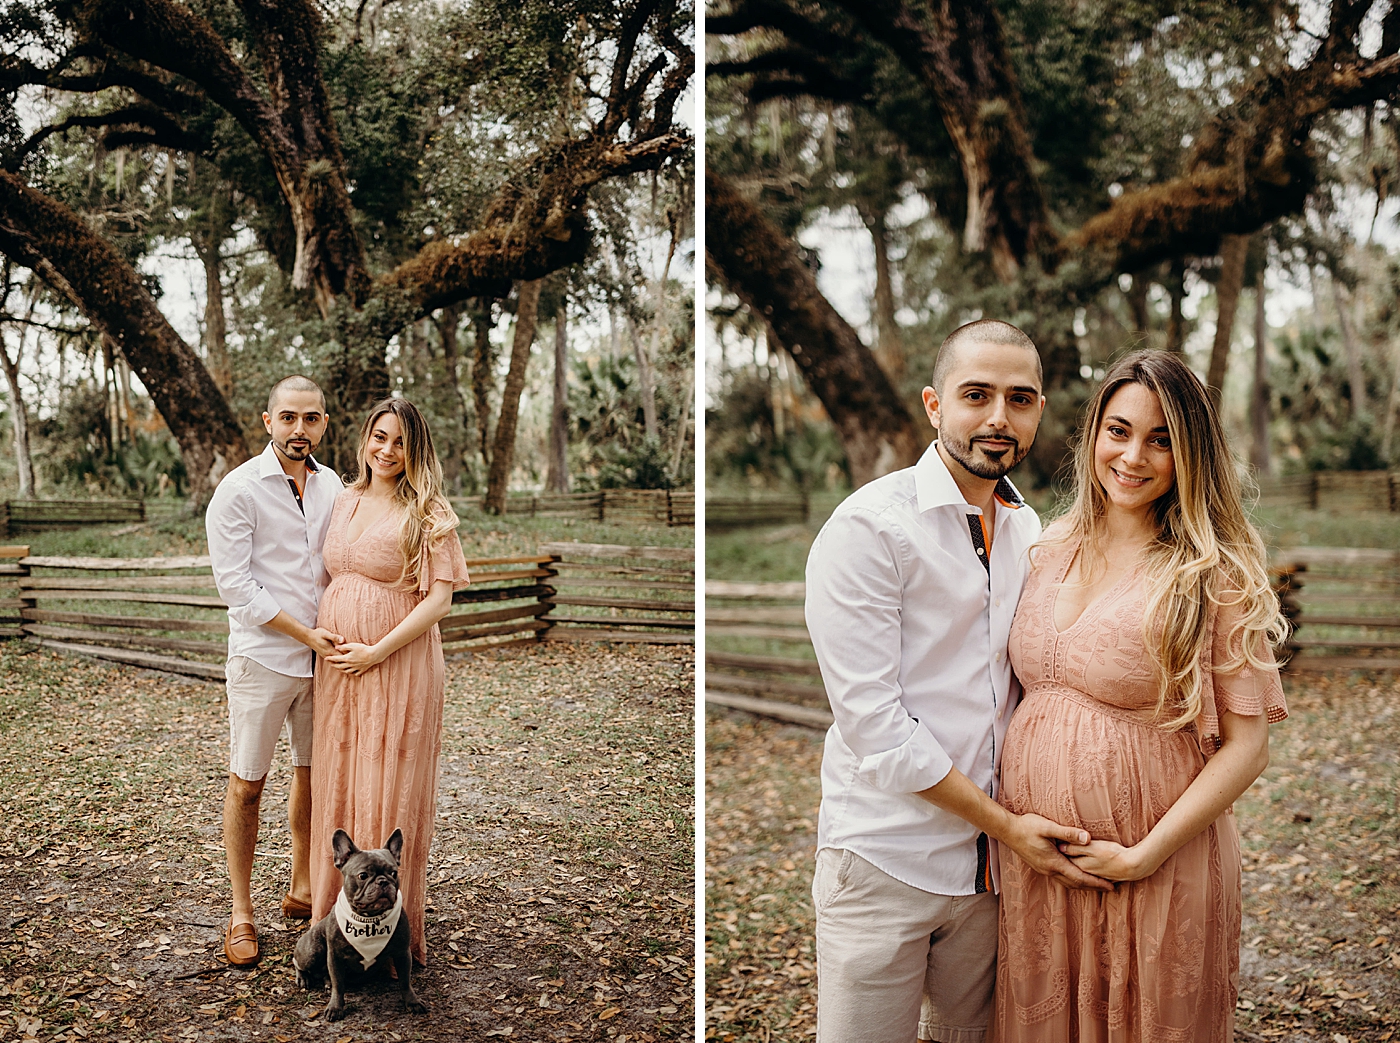 Couple holding each other with cute dog by their feet Riverbend Park Maternity Photography by South Florida Family Photographer Maggie Alvarez Photography